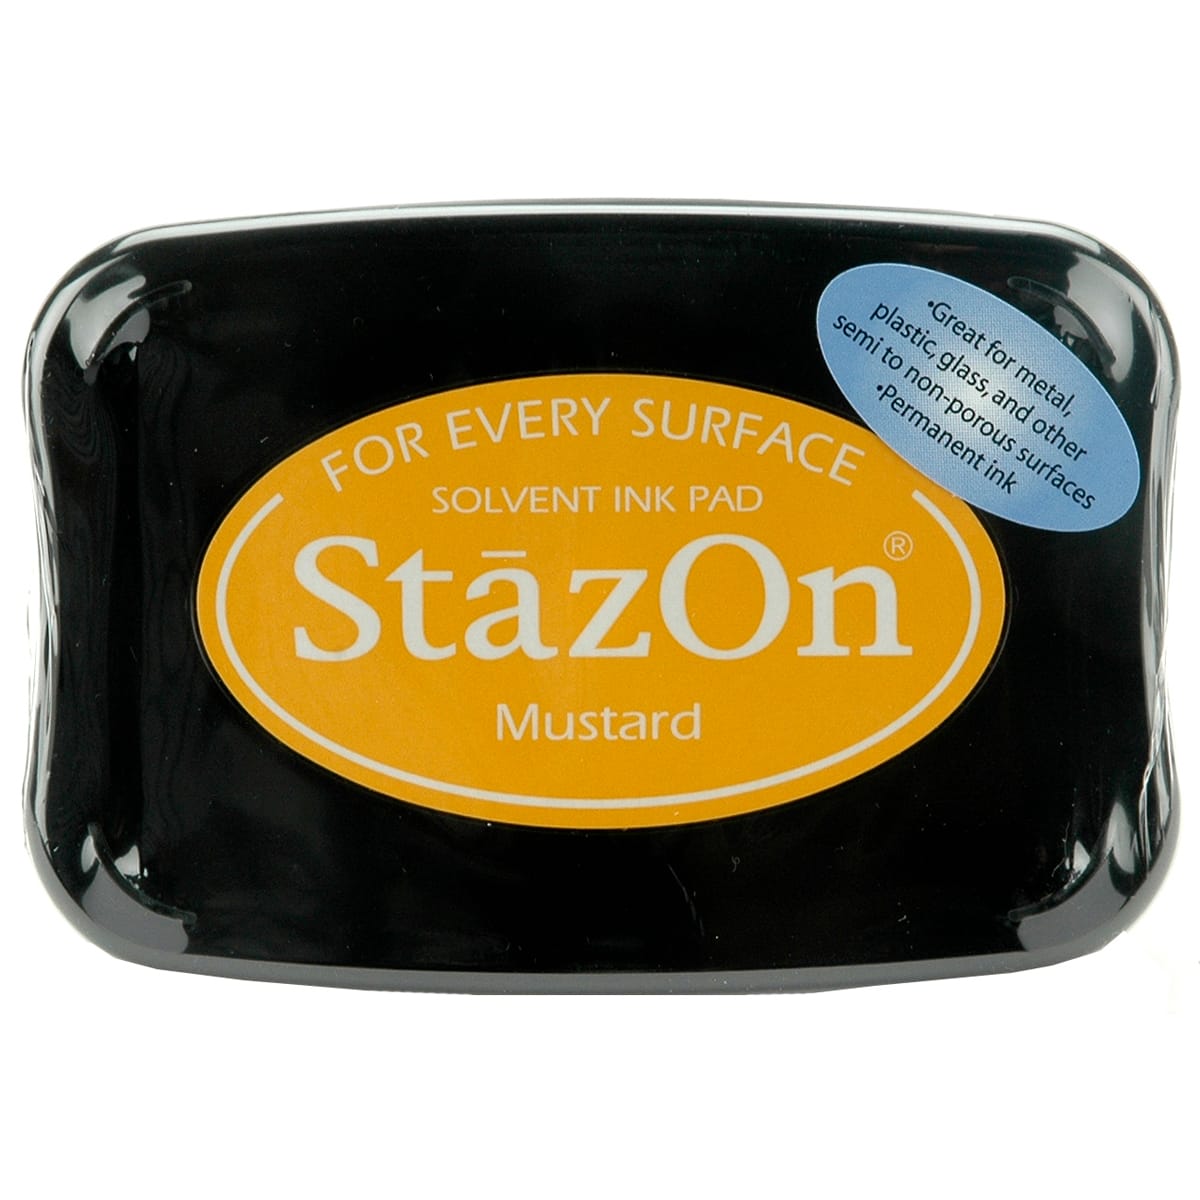 StazOn Craft Ink Pads and Inkers – Stampeaz, LLC